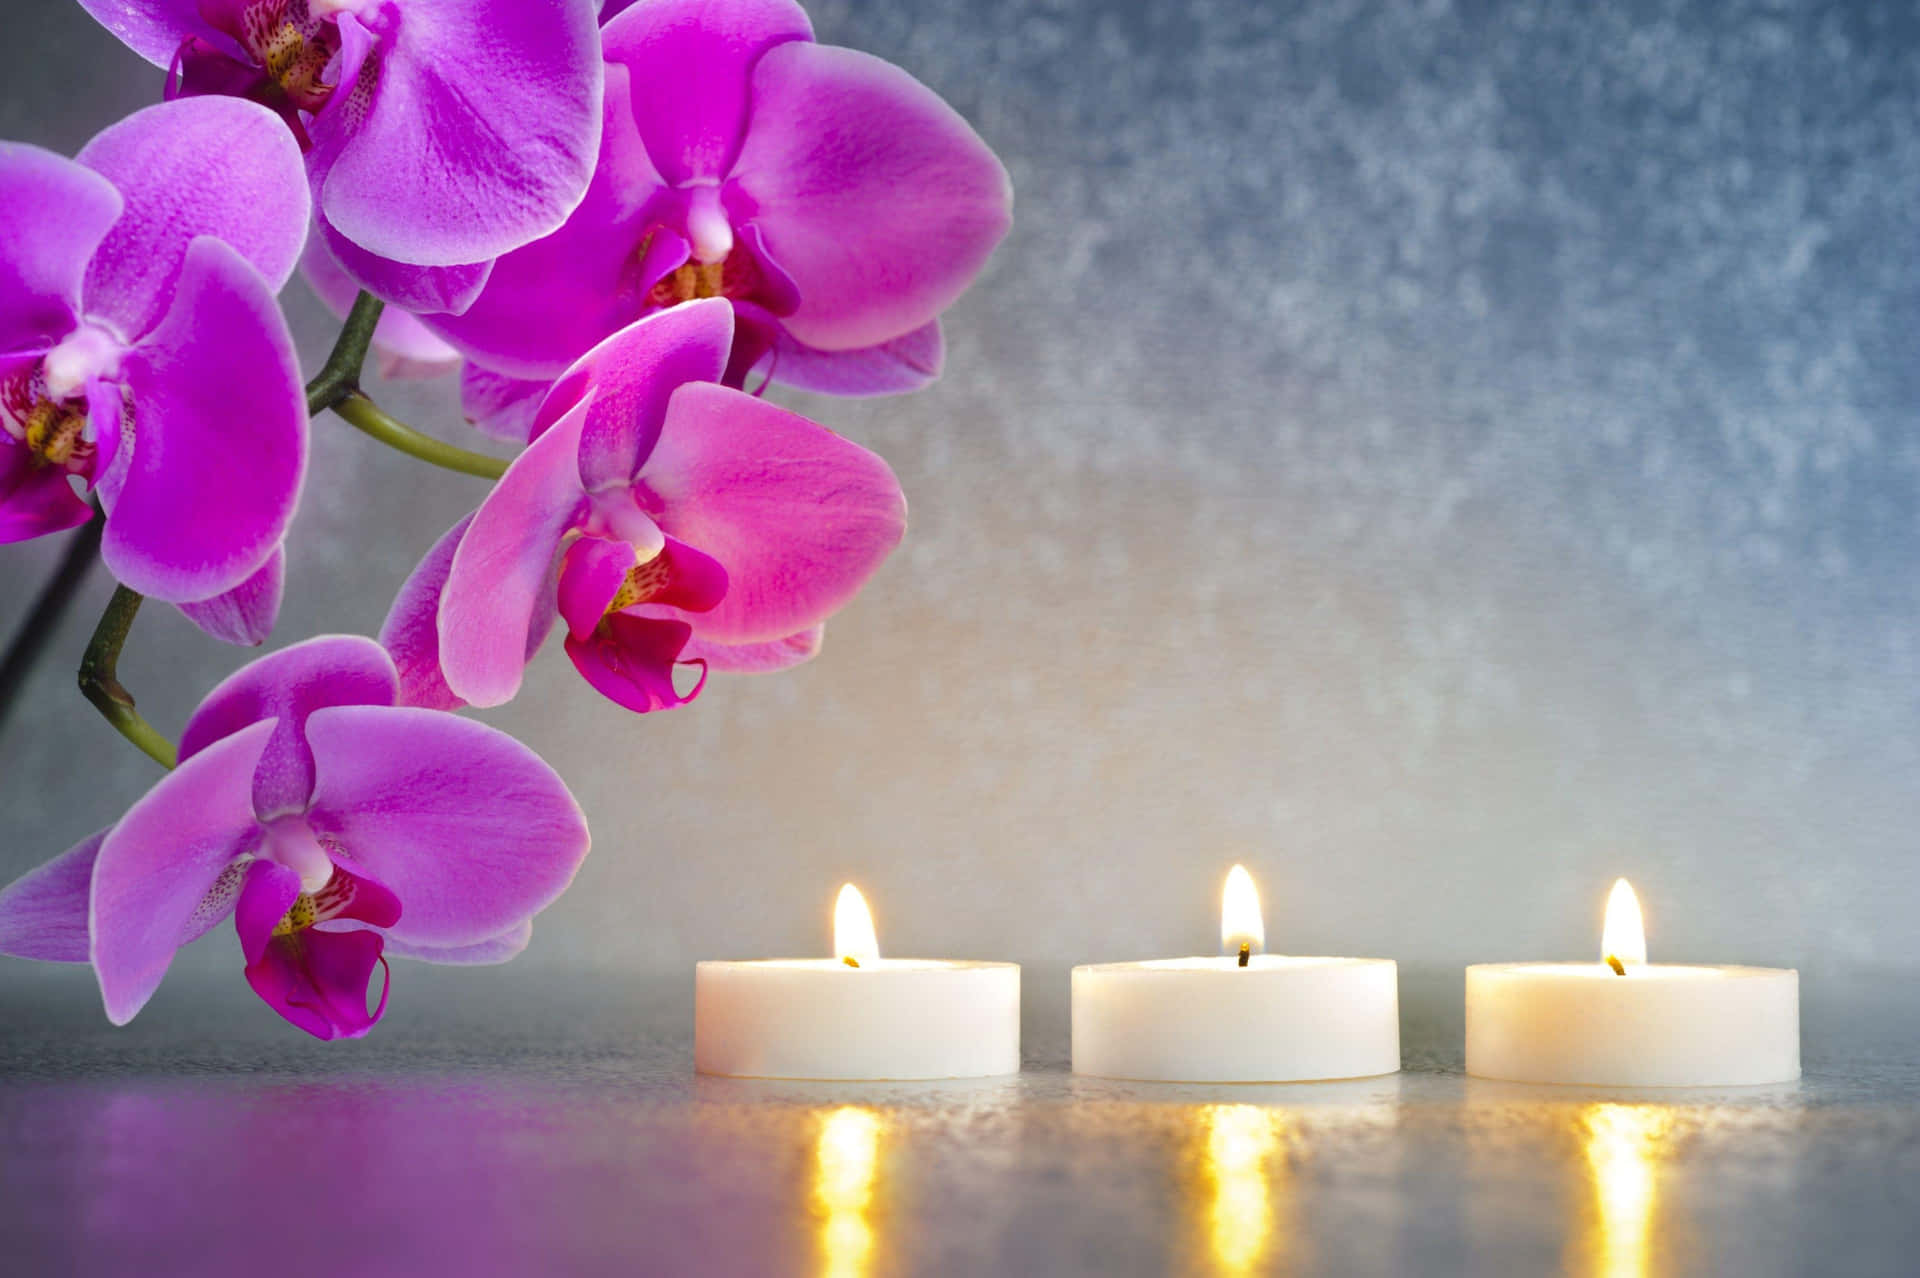 Orchidsand Candles Spa Setting Wallpaper